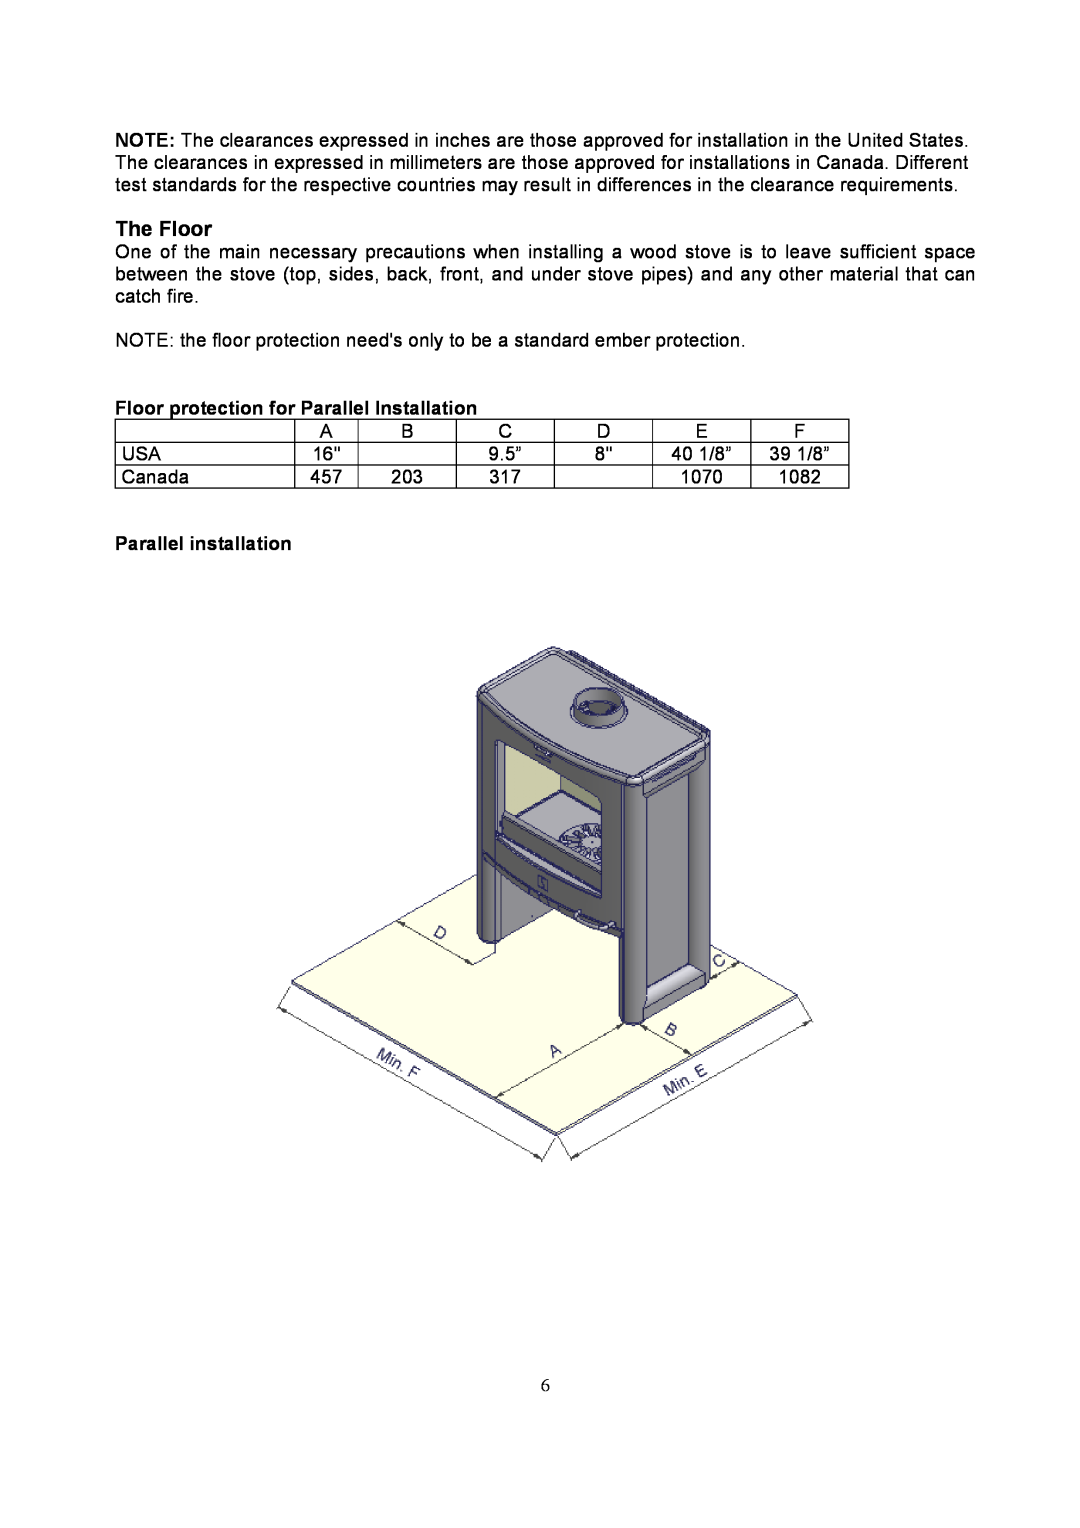 Omnitron Systems Technology A10 manual The Floor, Floor protection for Parallel Installation, Parallel installation 